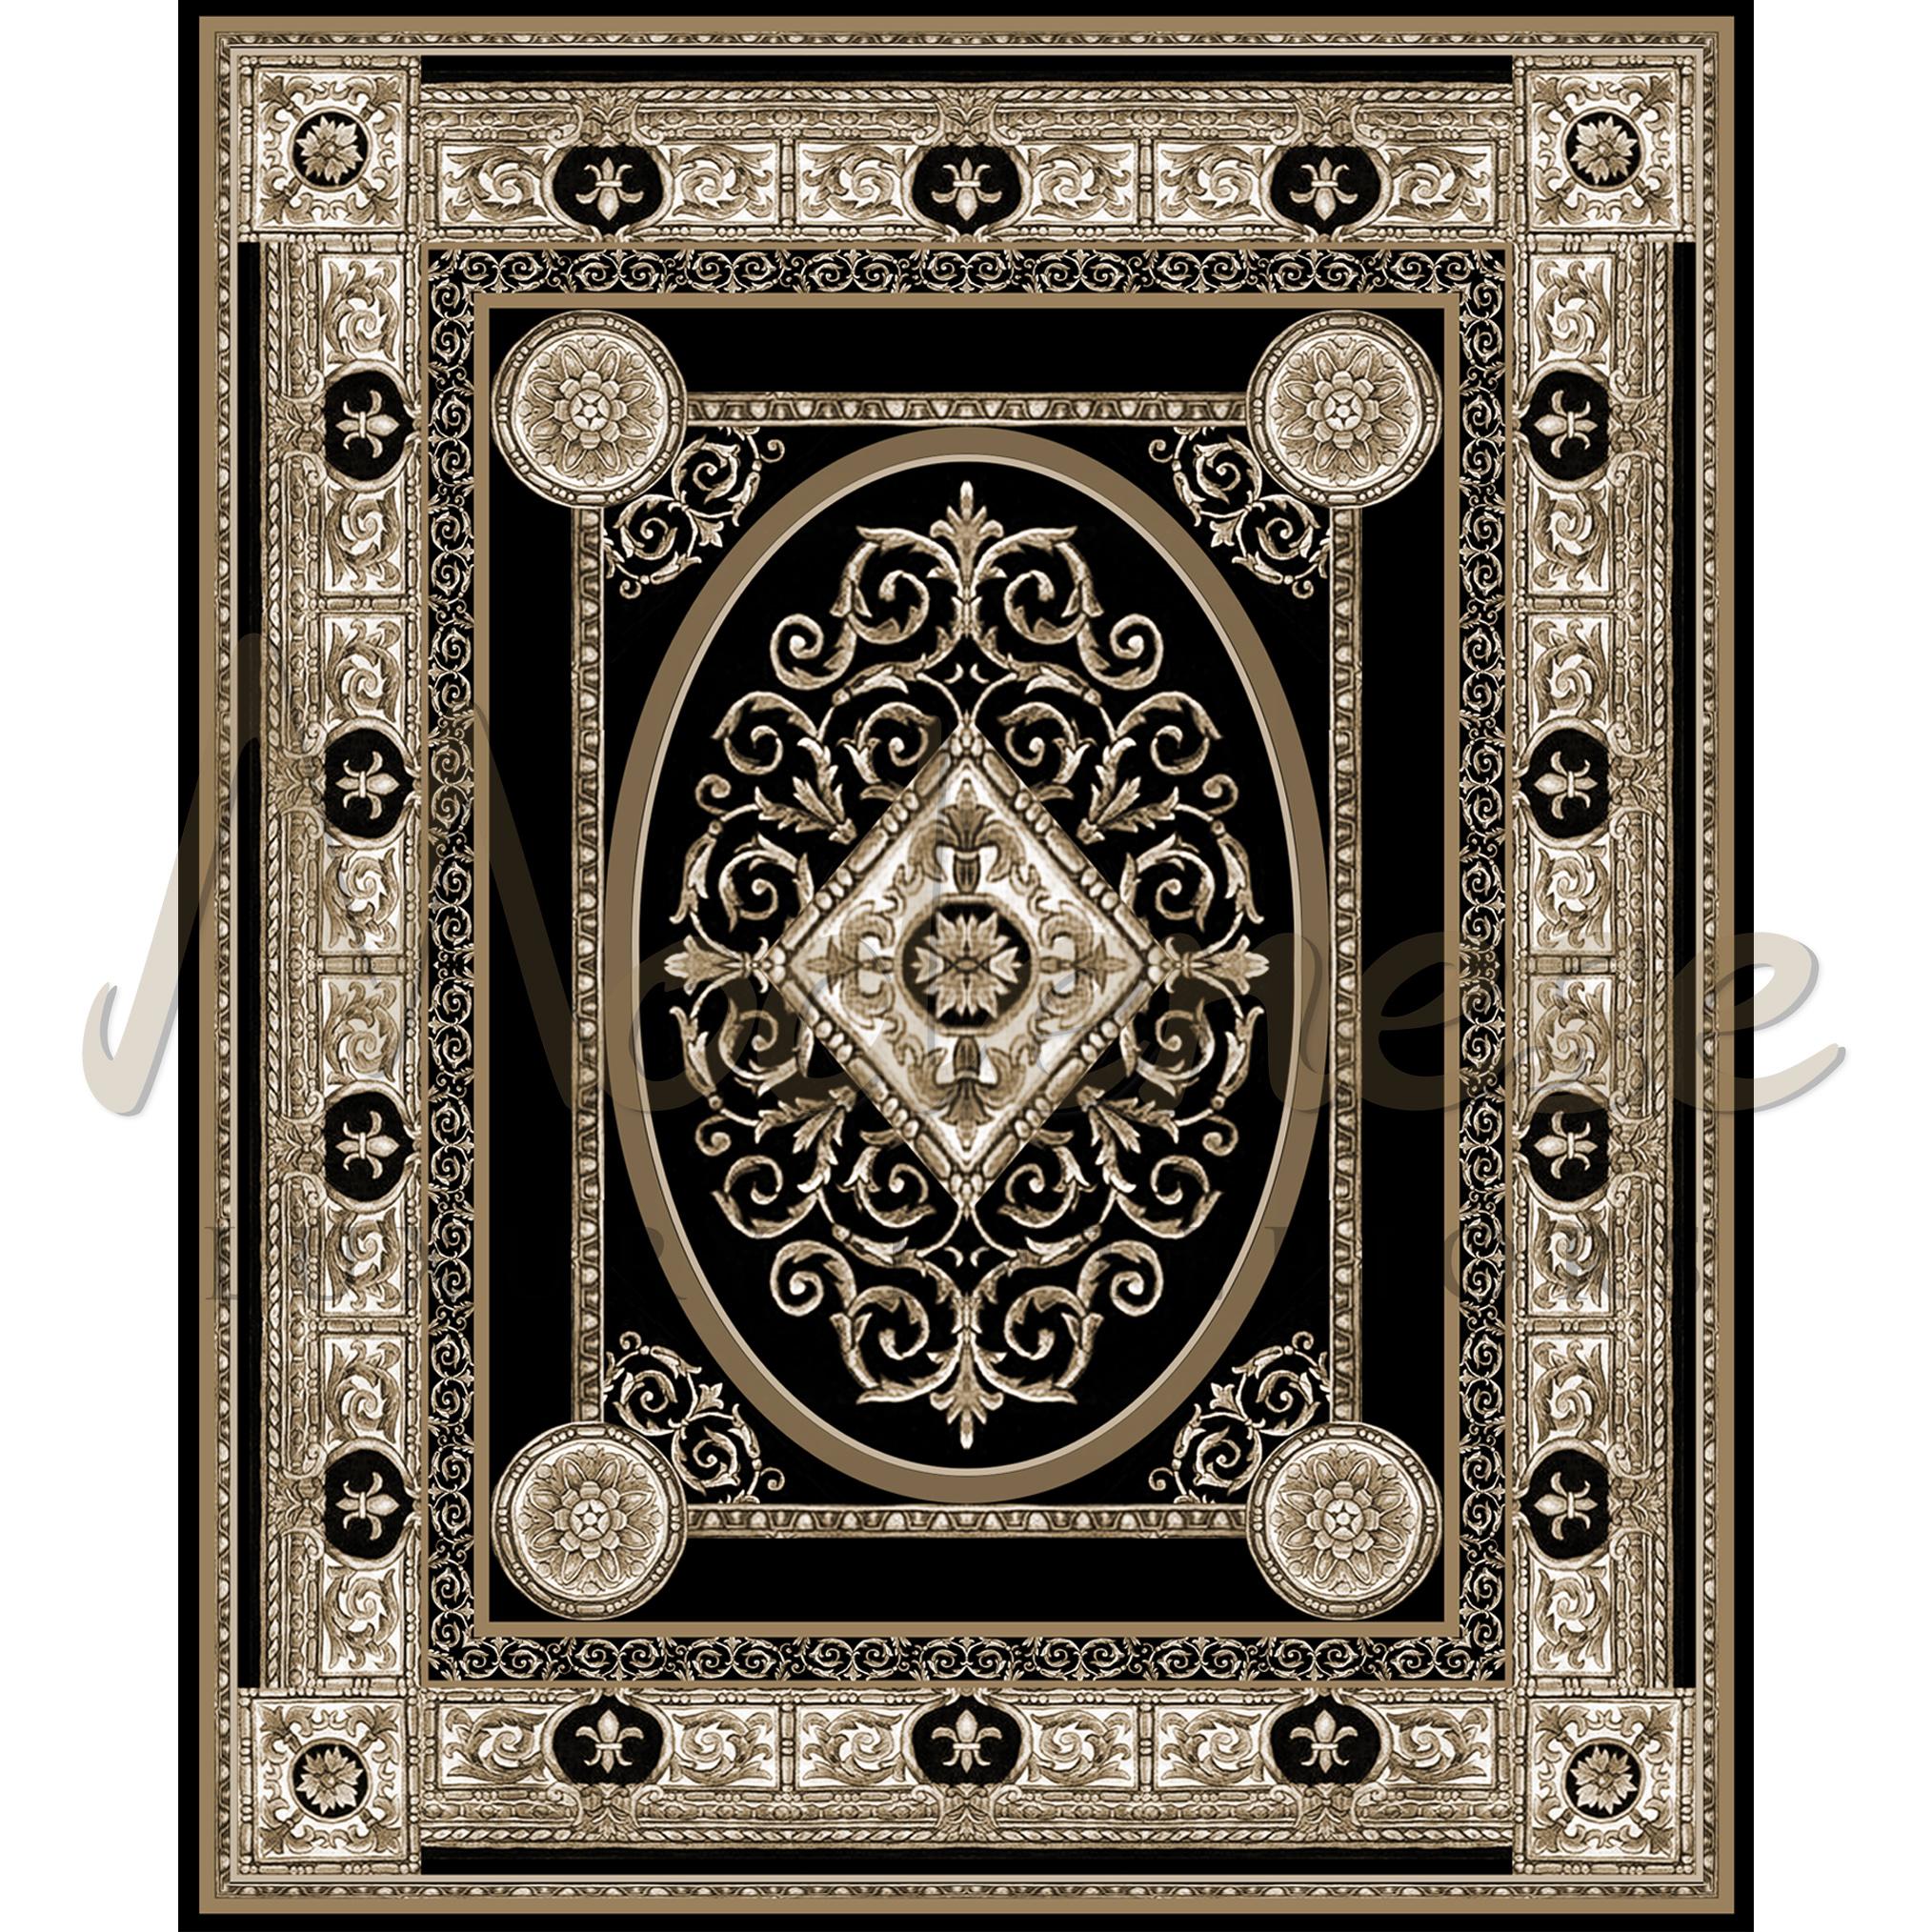 Classy soft 100% bamboo silk oriental rug handknitted by Italian producer Modenese Luxury Interiors. This item goes best with neoclassical furnishings in private living room. Intricate pattern of baroque squiggles displaying the heraldic symbol of a